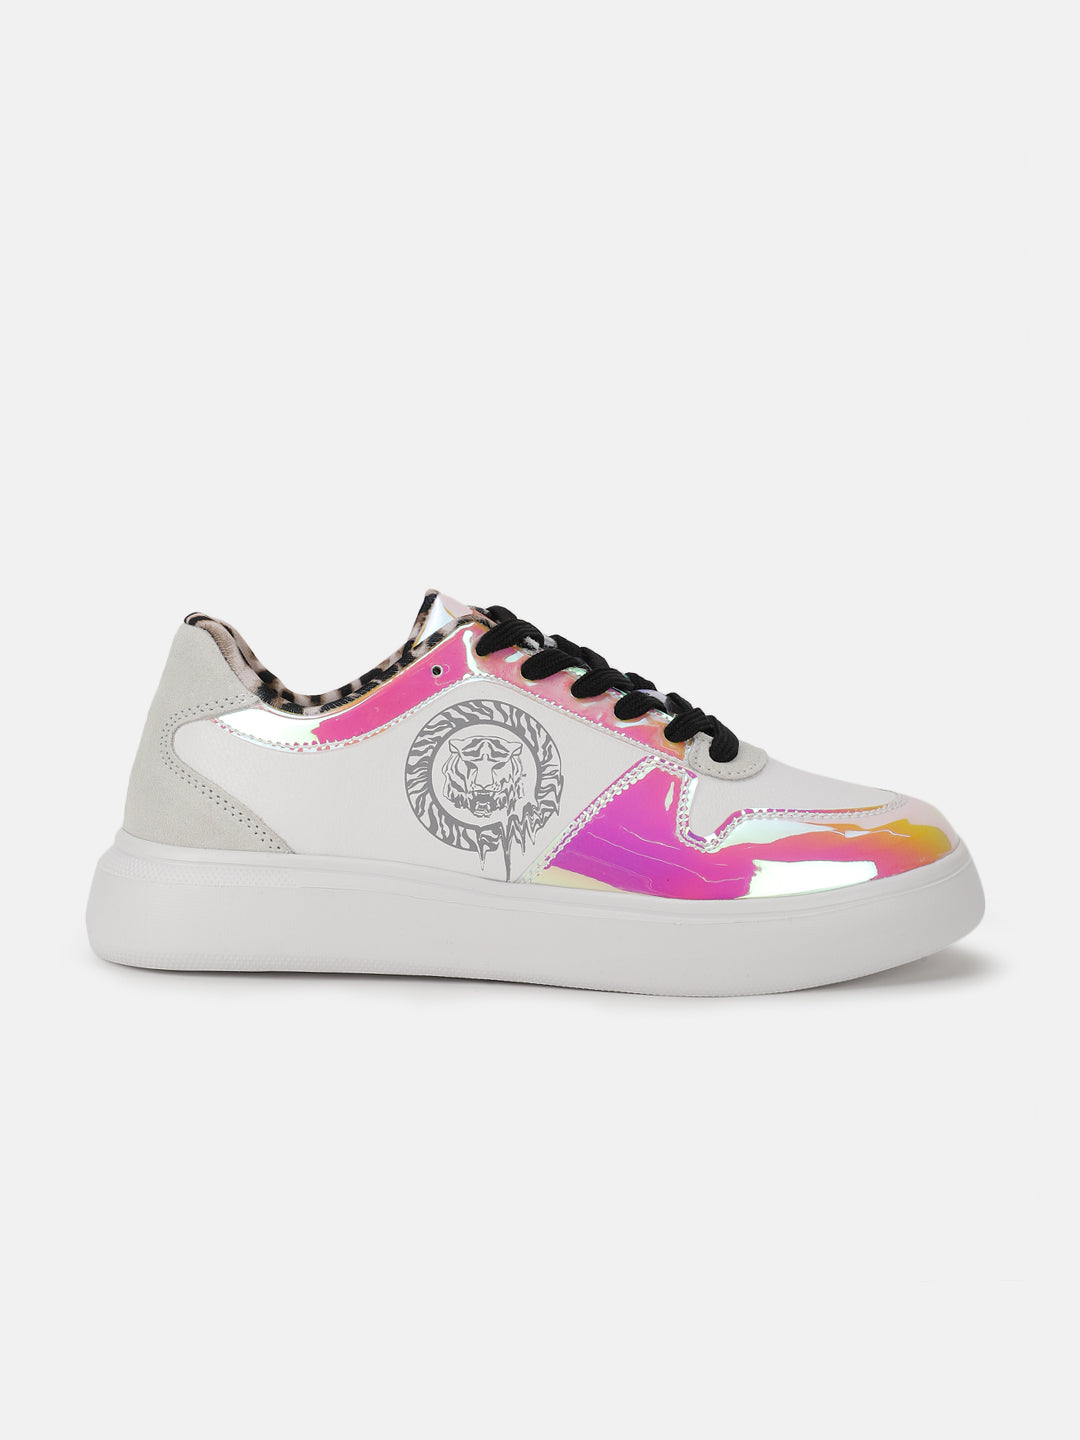 Just Cavalli Women White Solid Lace-up Sneakers